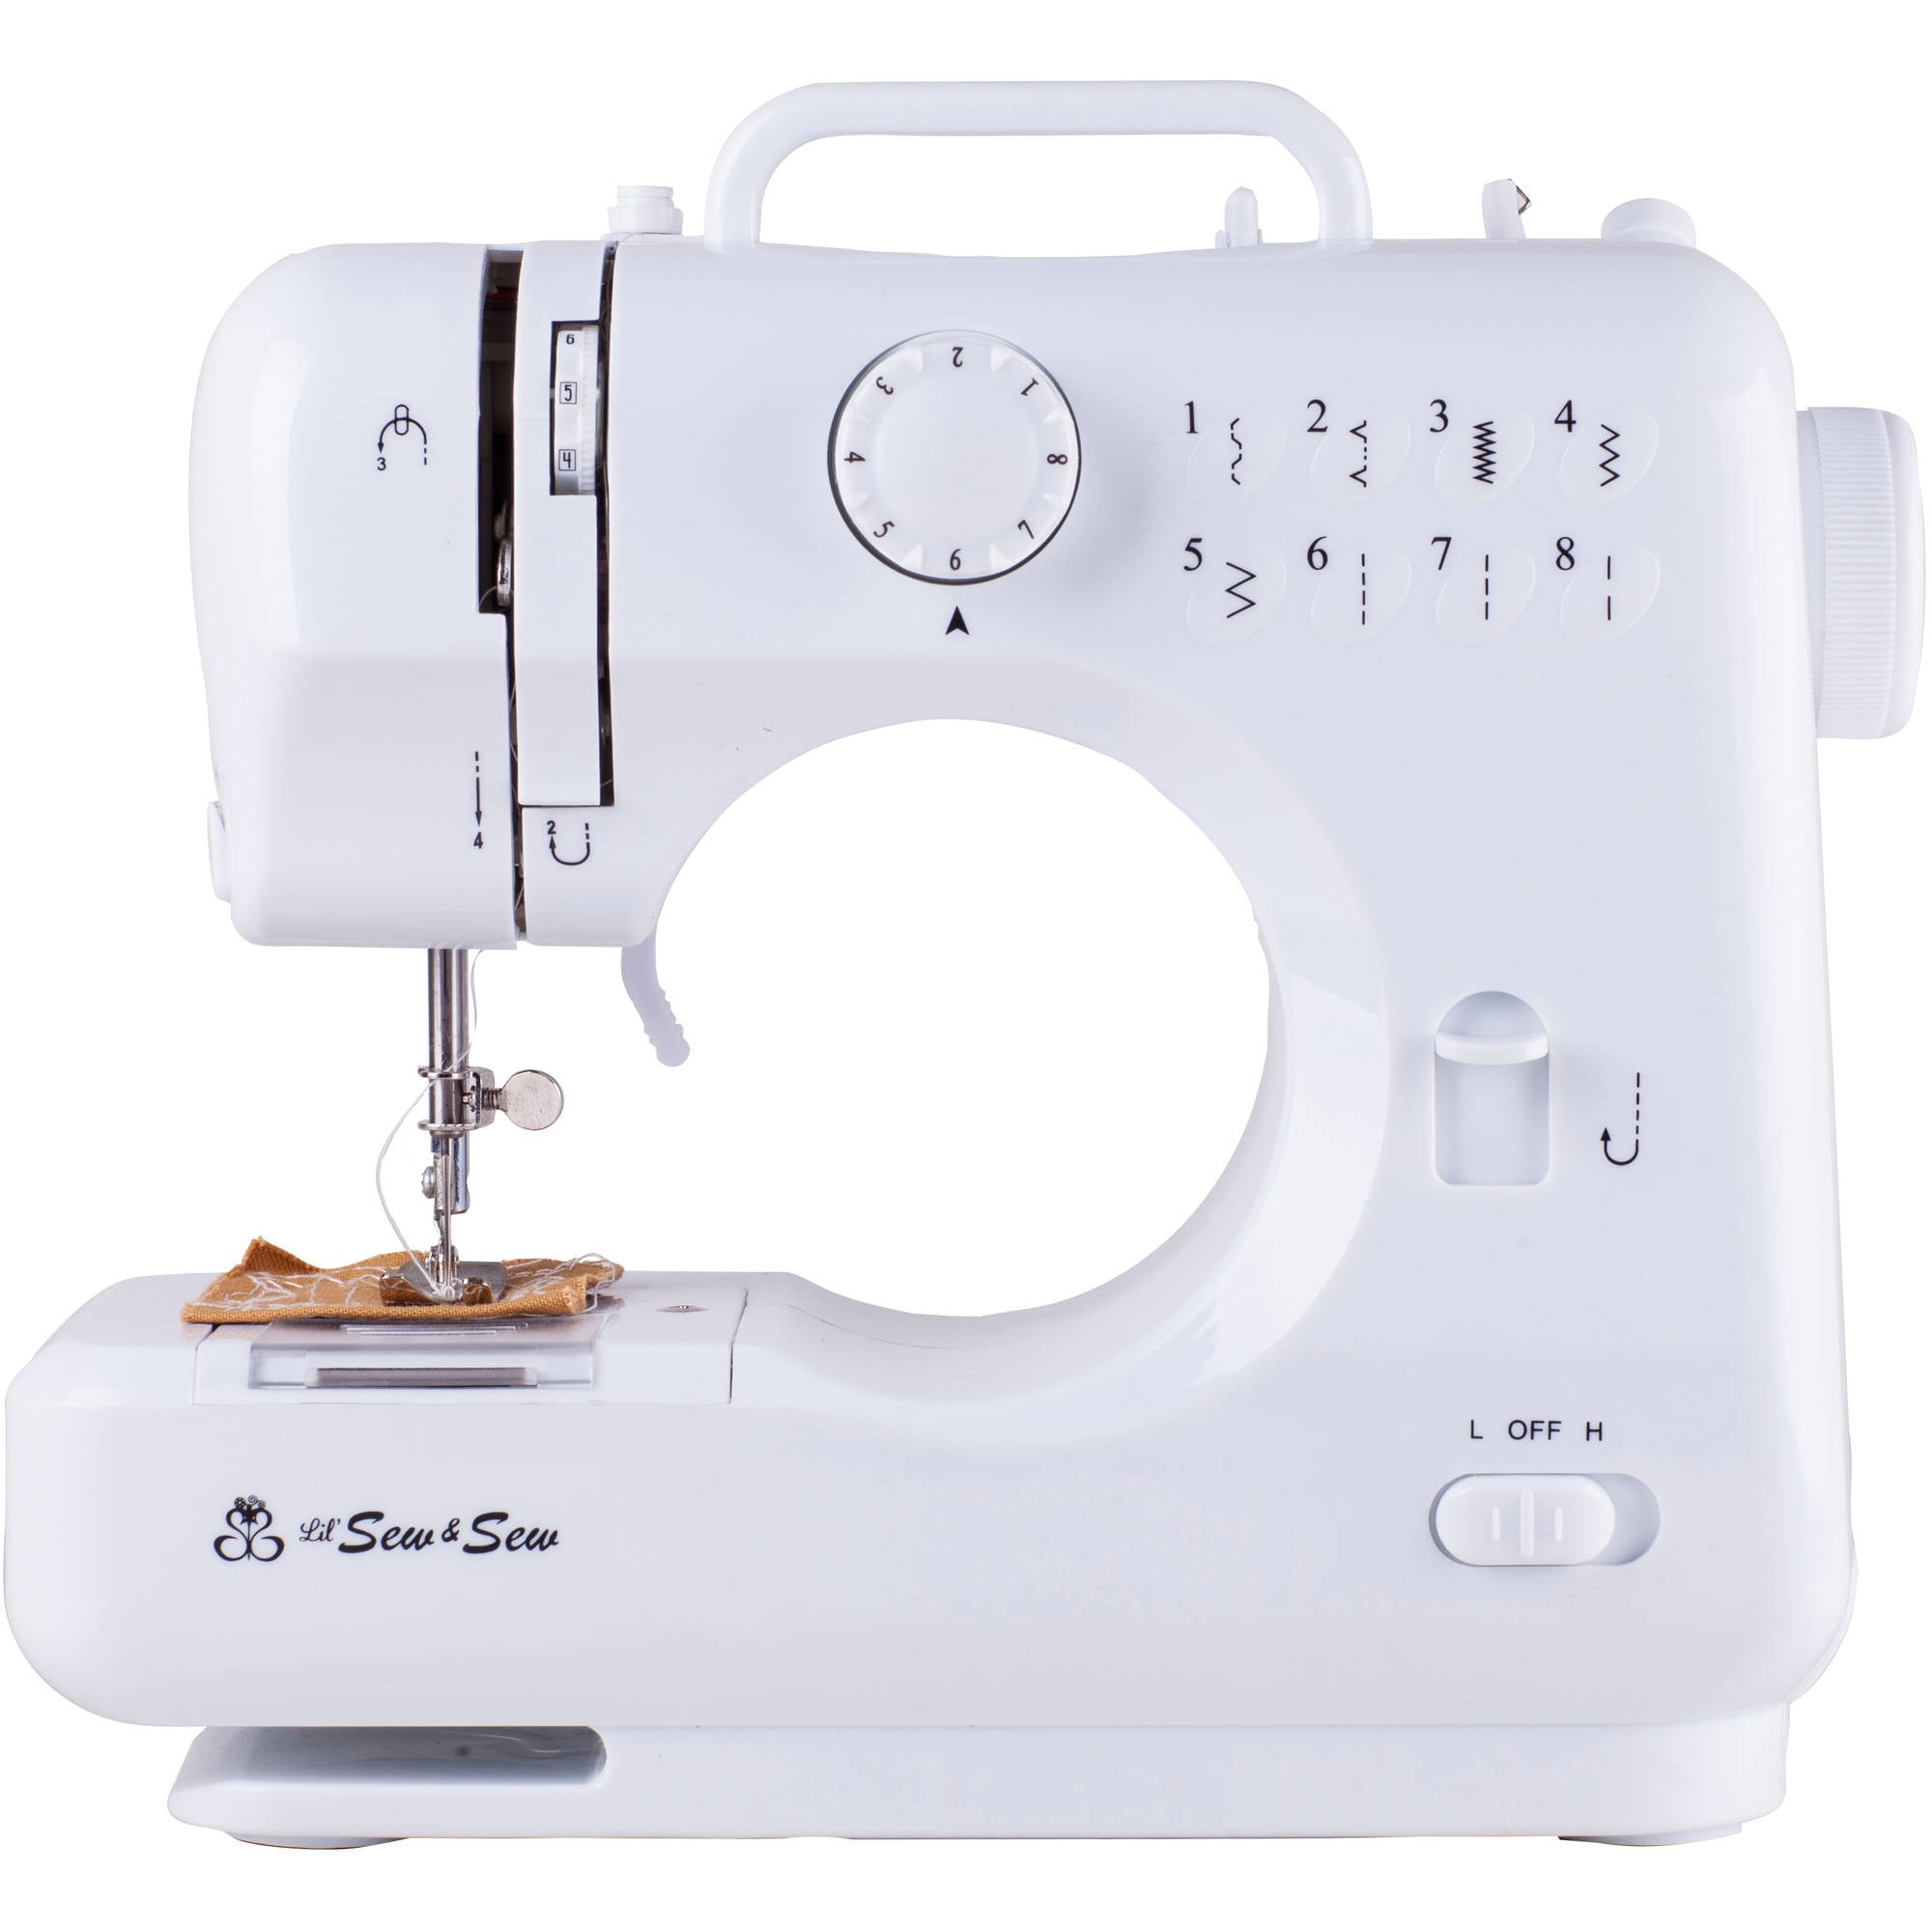 Michley Electronics Mechanical Sewing Machine & Reviews